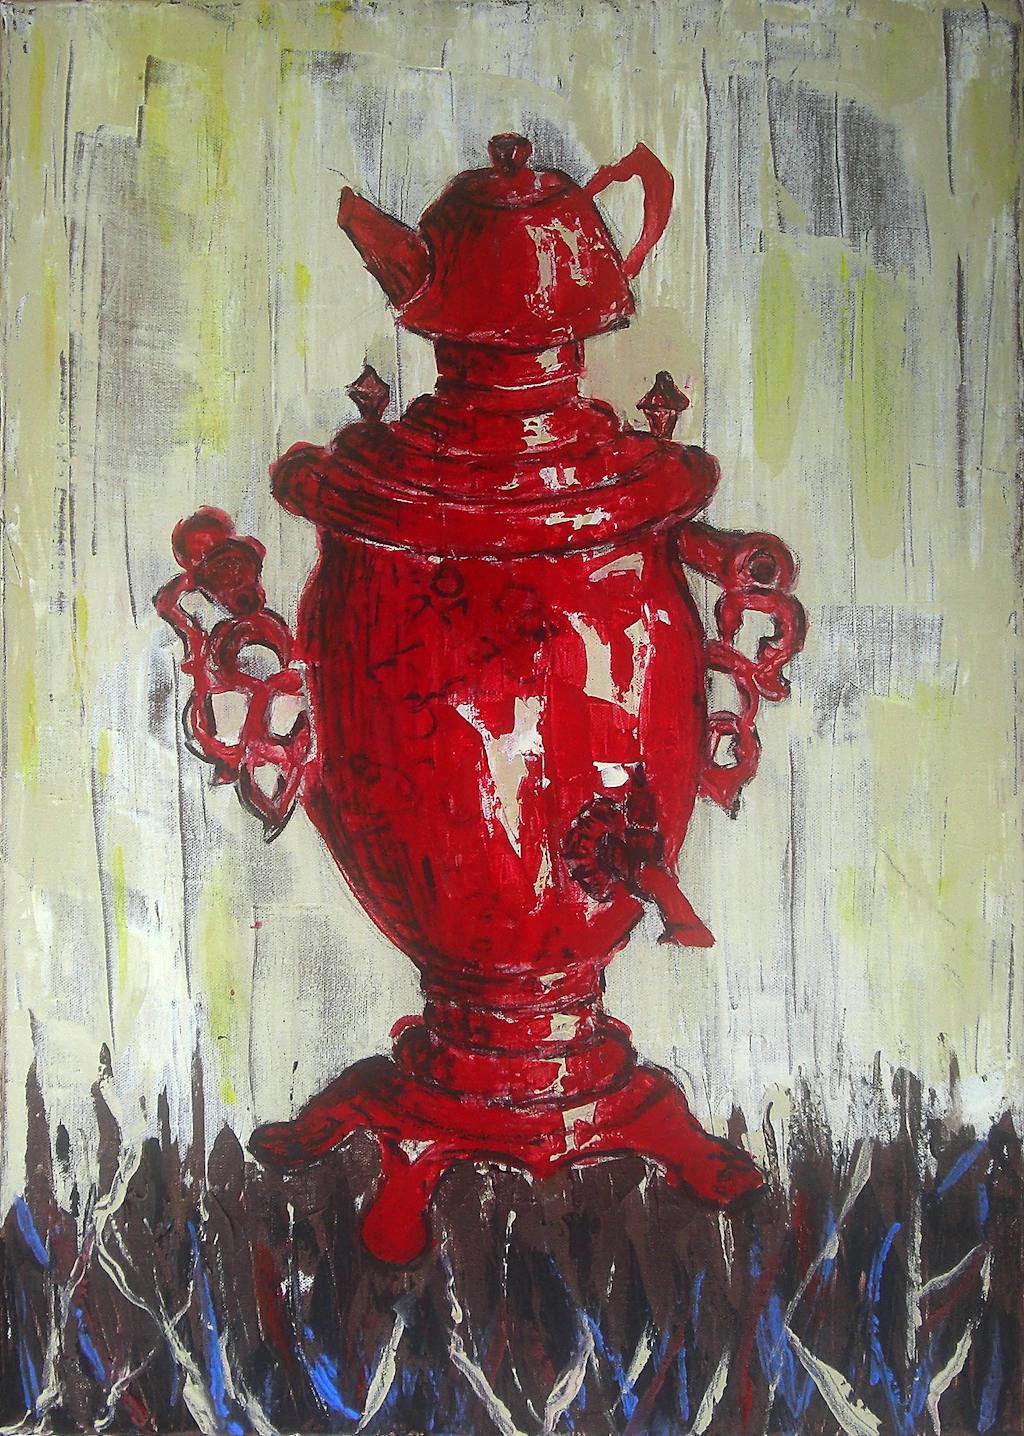 Painting "Samovar", painted by Elena Birkenwald in 2008